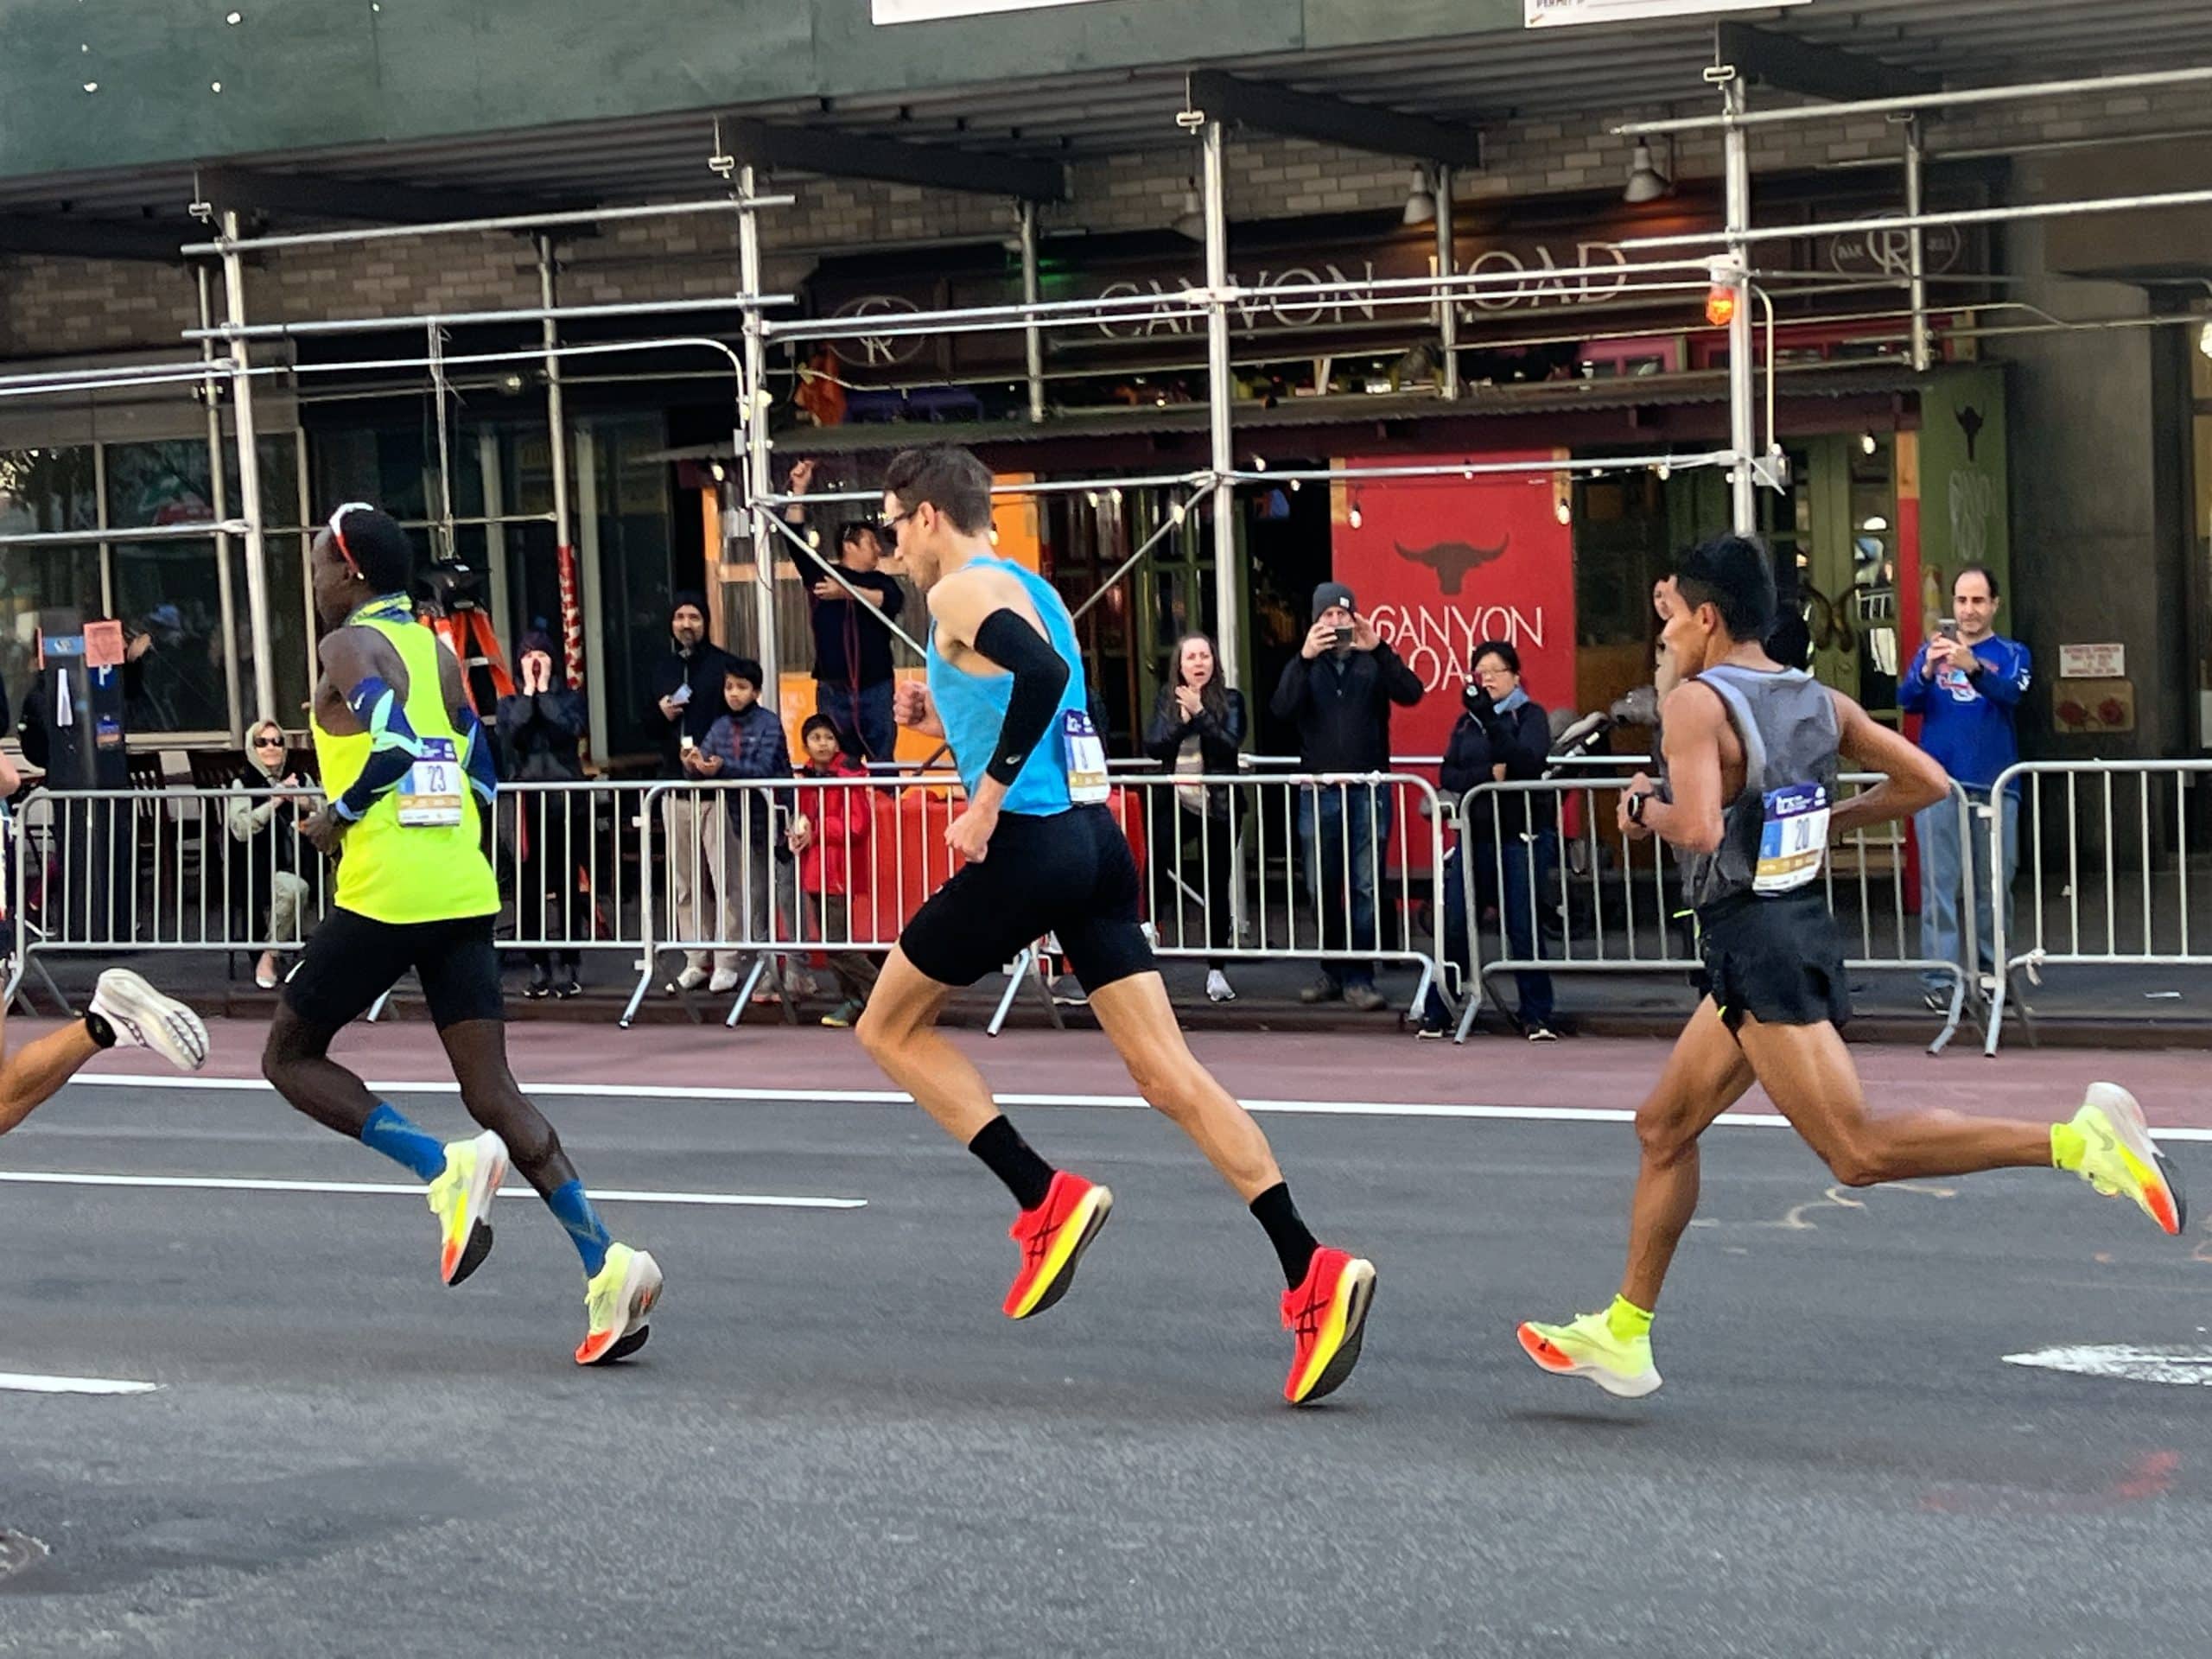 The NYC Marathon returns to First Avenue at full capacity with 50k runners | Upper East Site